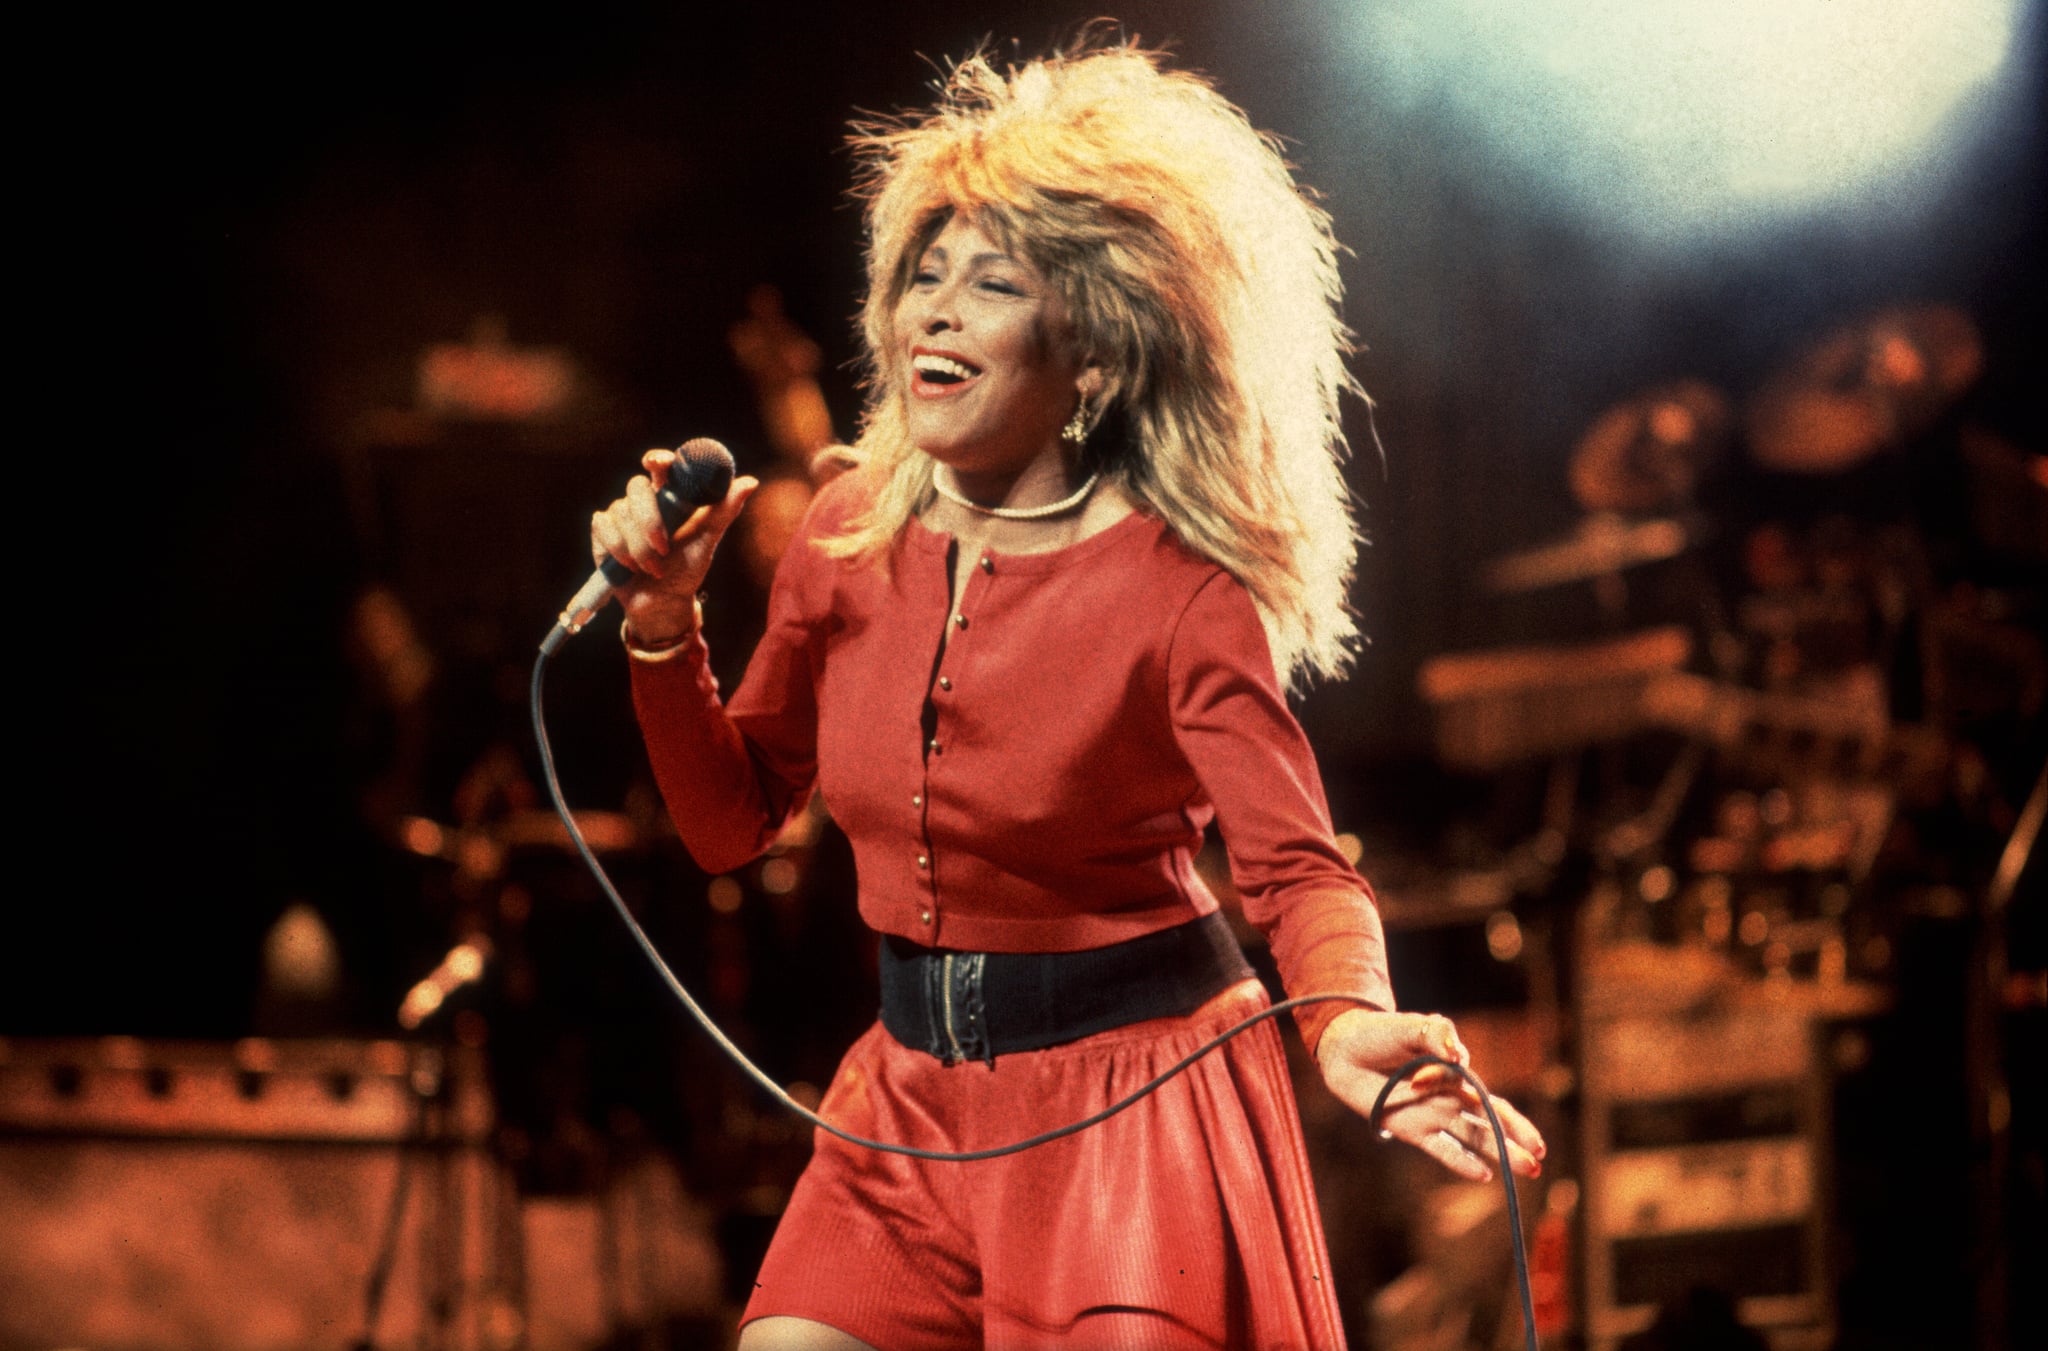 American R&B and Pop singer Tina Turner performs onstage at the Poplar Creek Music Theater, Hoffman Estates, Illinois, September 12, 1987. (Photo by Paul Natkin/Getty Images)